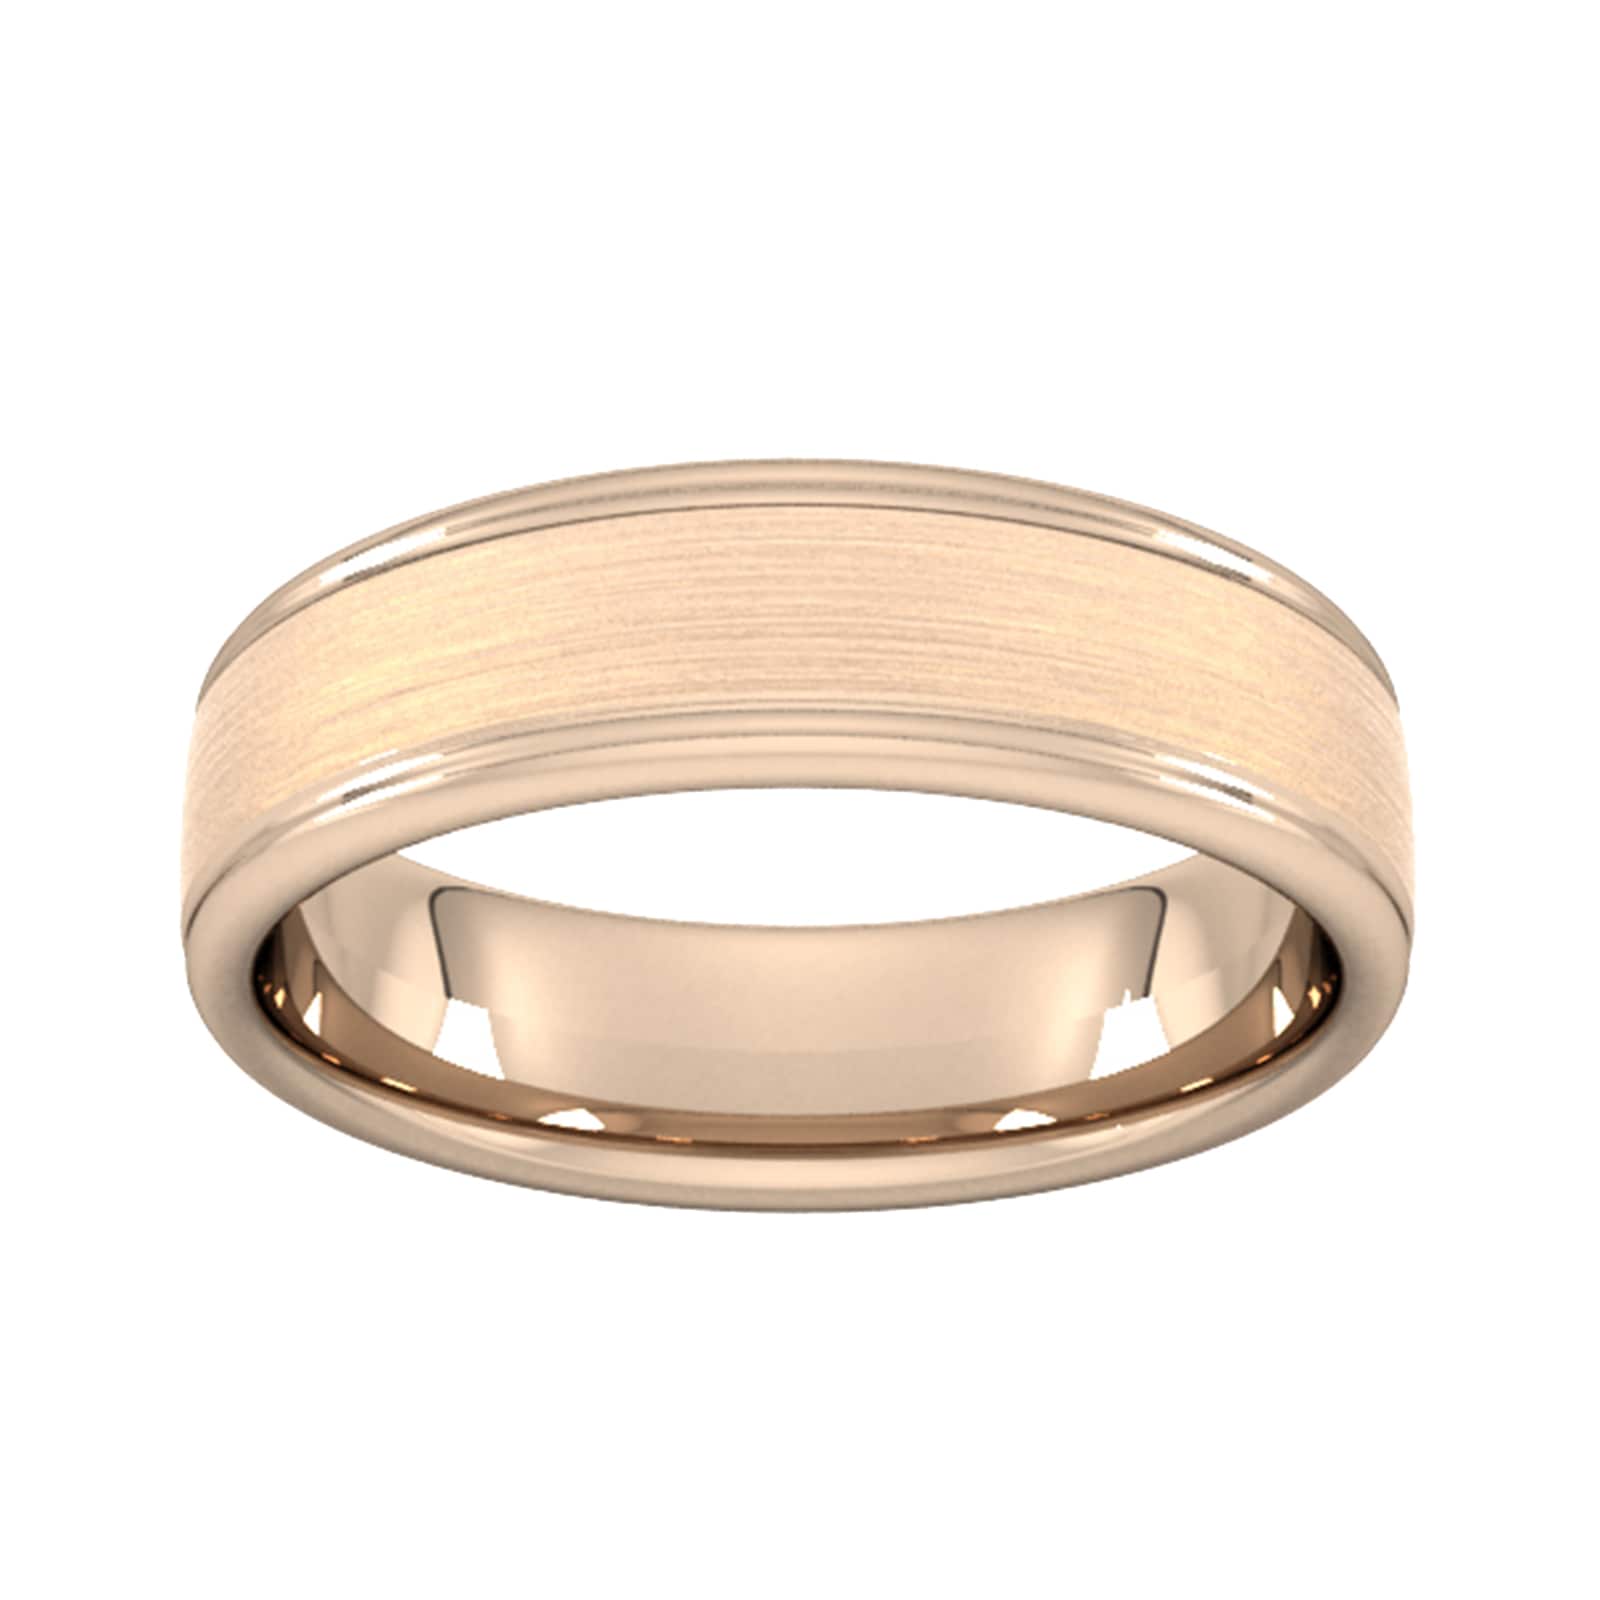 6mm Traditional Court Heavy Matt Centre With Grooves Wedding Ring In 18 Carat Rose Gold - Ring Size W